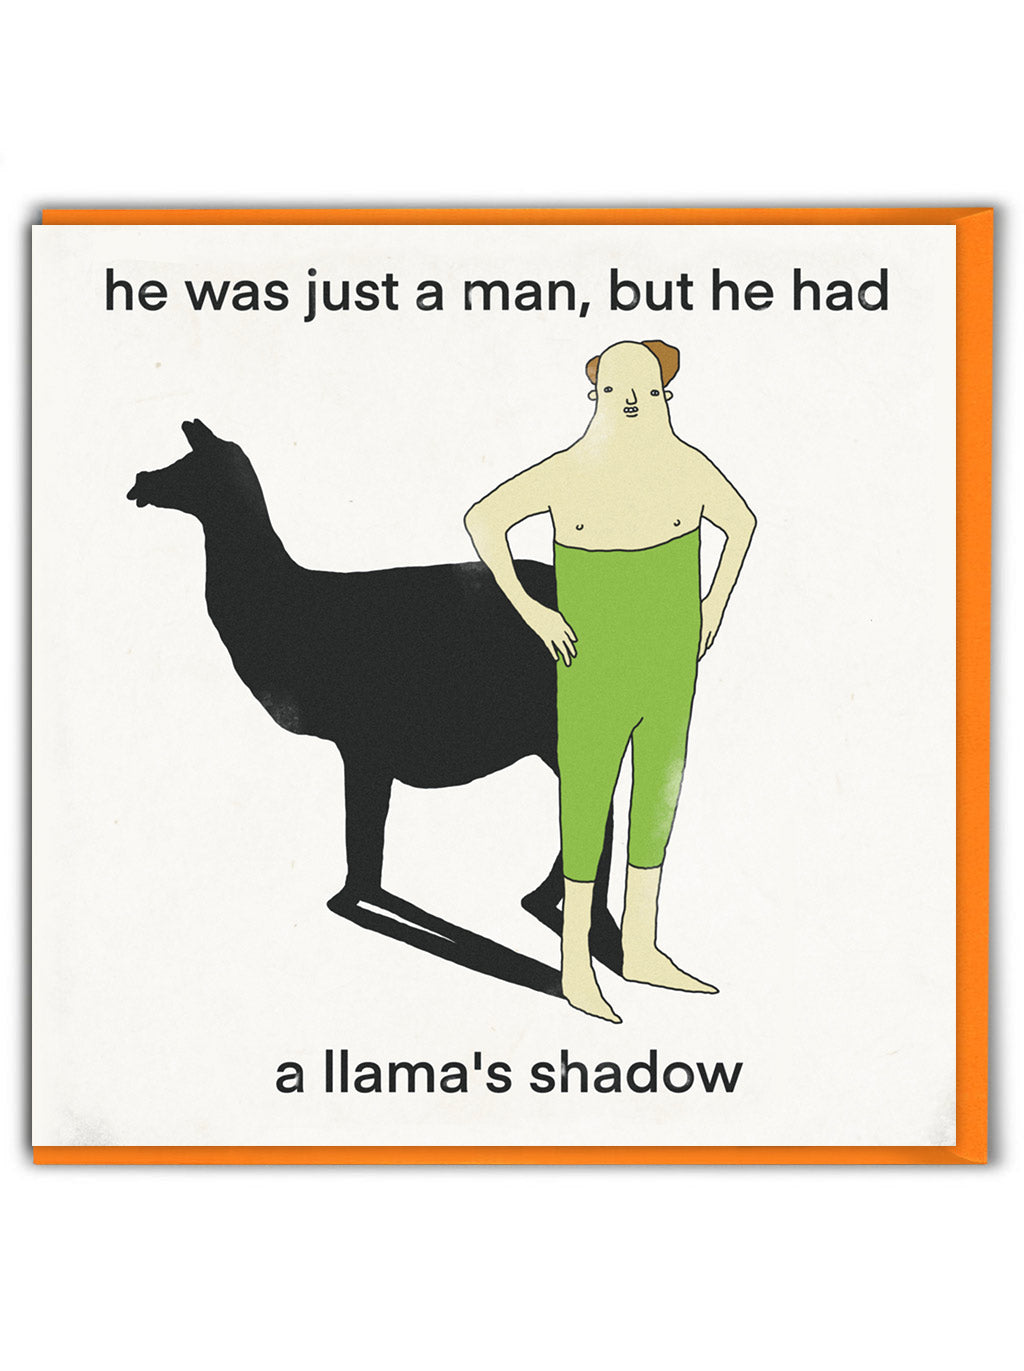 A greetings card with a white background showing a white man with his green trousers pulled up really high and his shadow is the outline of a llama. The words on the card say 'he was just a man, but he had a llama's shadow'.